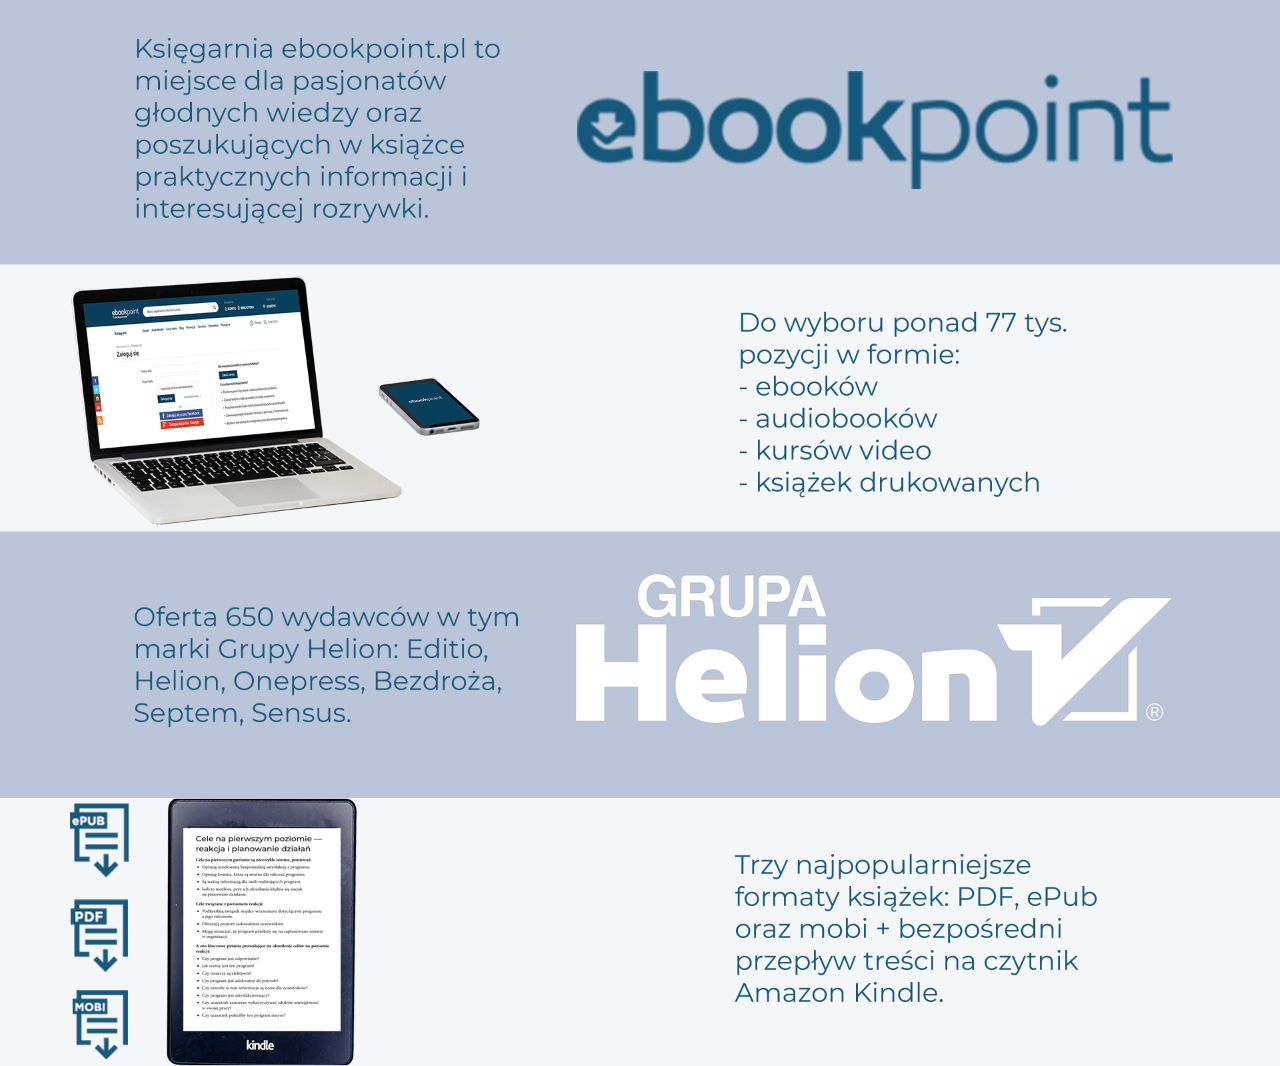 ebookpoint offer 650 publishers